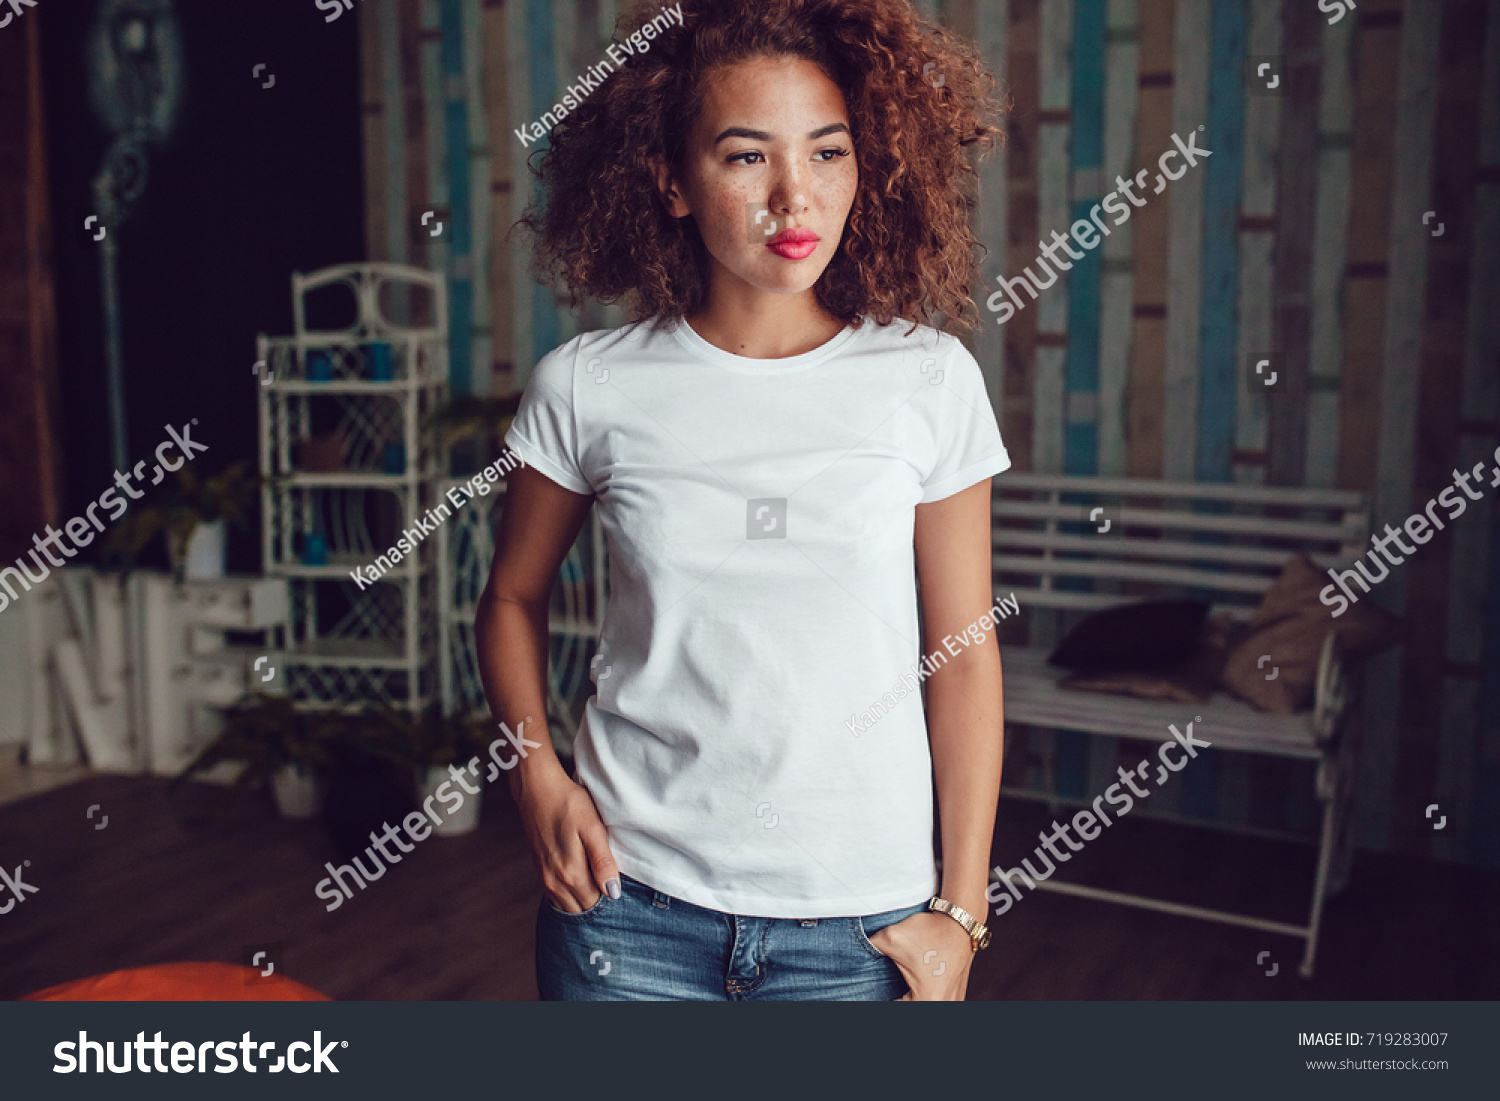 Curly haired girl with freckles in blank white t-shirt. Mock up. #719283007